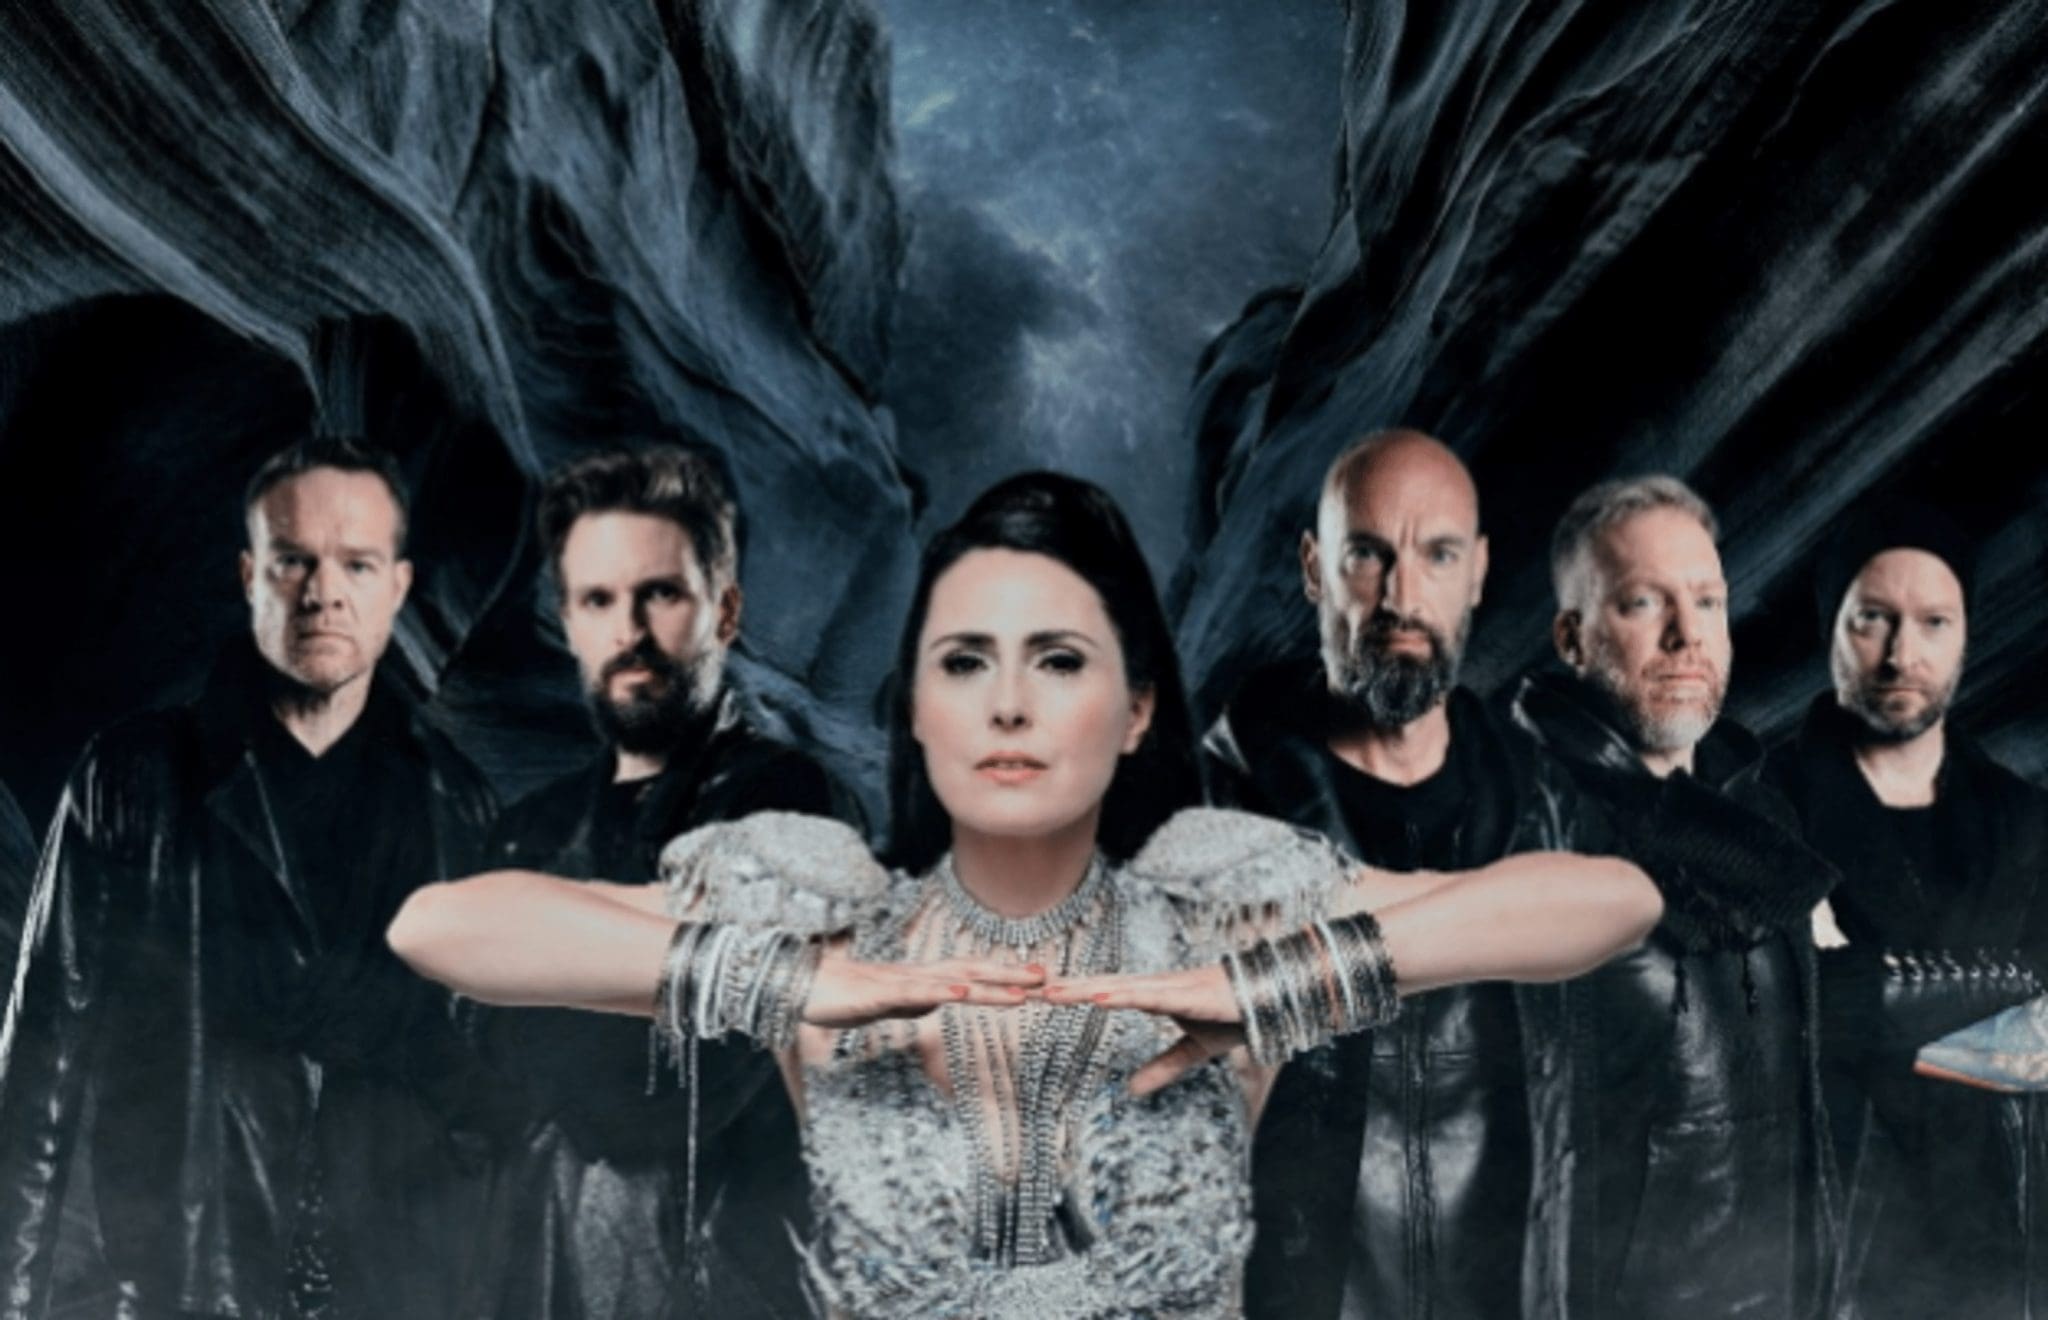 Within Temptation Released 'Don't Pray For Me,' Their First Song Of 2022. This Is a Heavy-Sounding And Serious-Sounding Song That Raises Social Issues